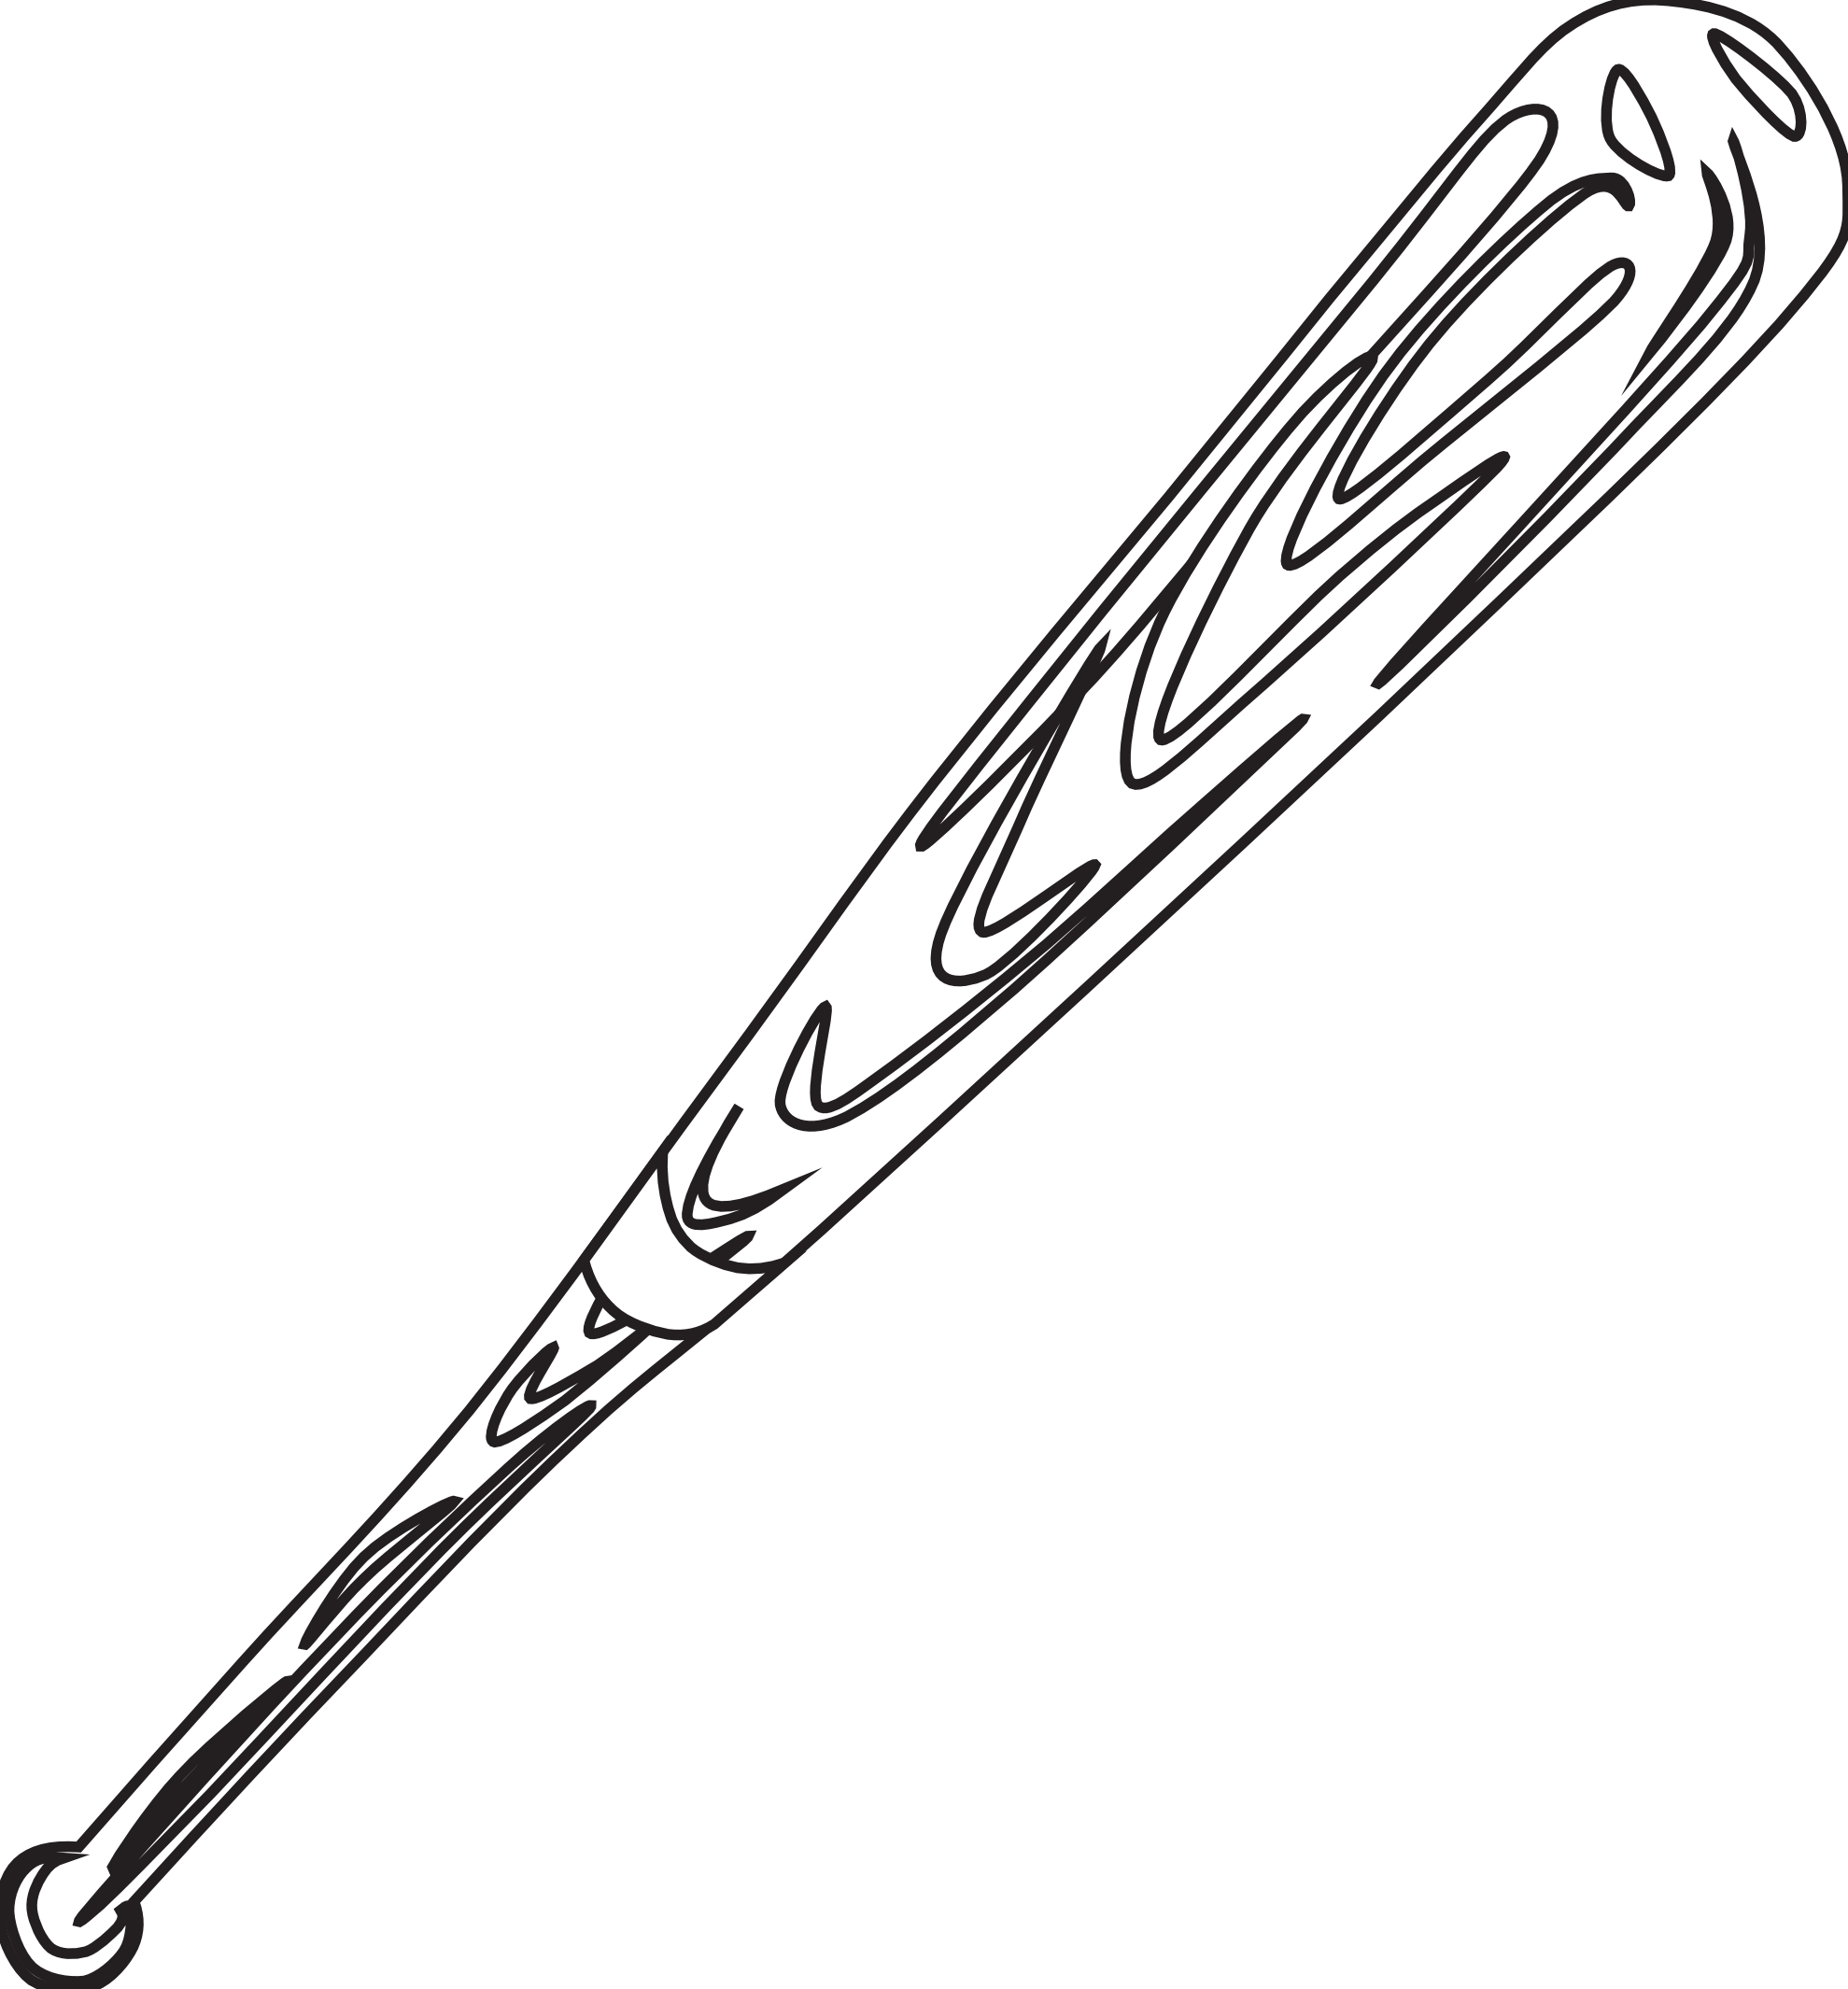 Baseball Bat Coloring Page - Coloring Pages for Kids and for Adults